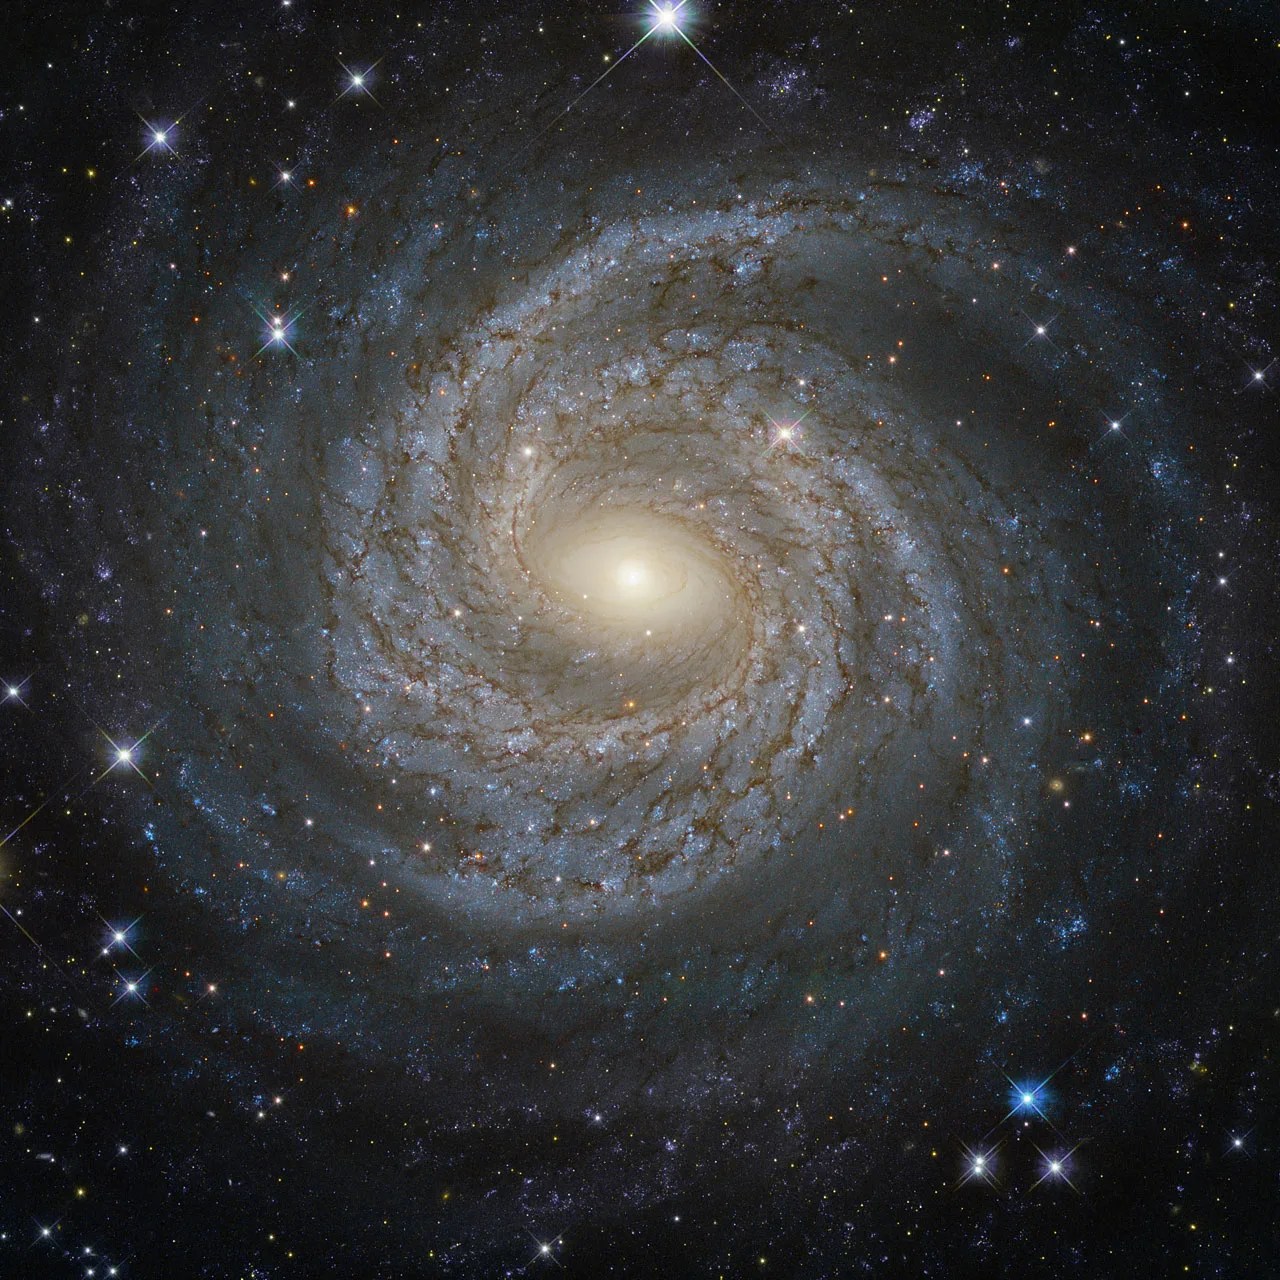 Spiral galaxy ngc 6814 with luminous arms, a glowing core, and dark dust streaking throughout the arms